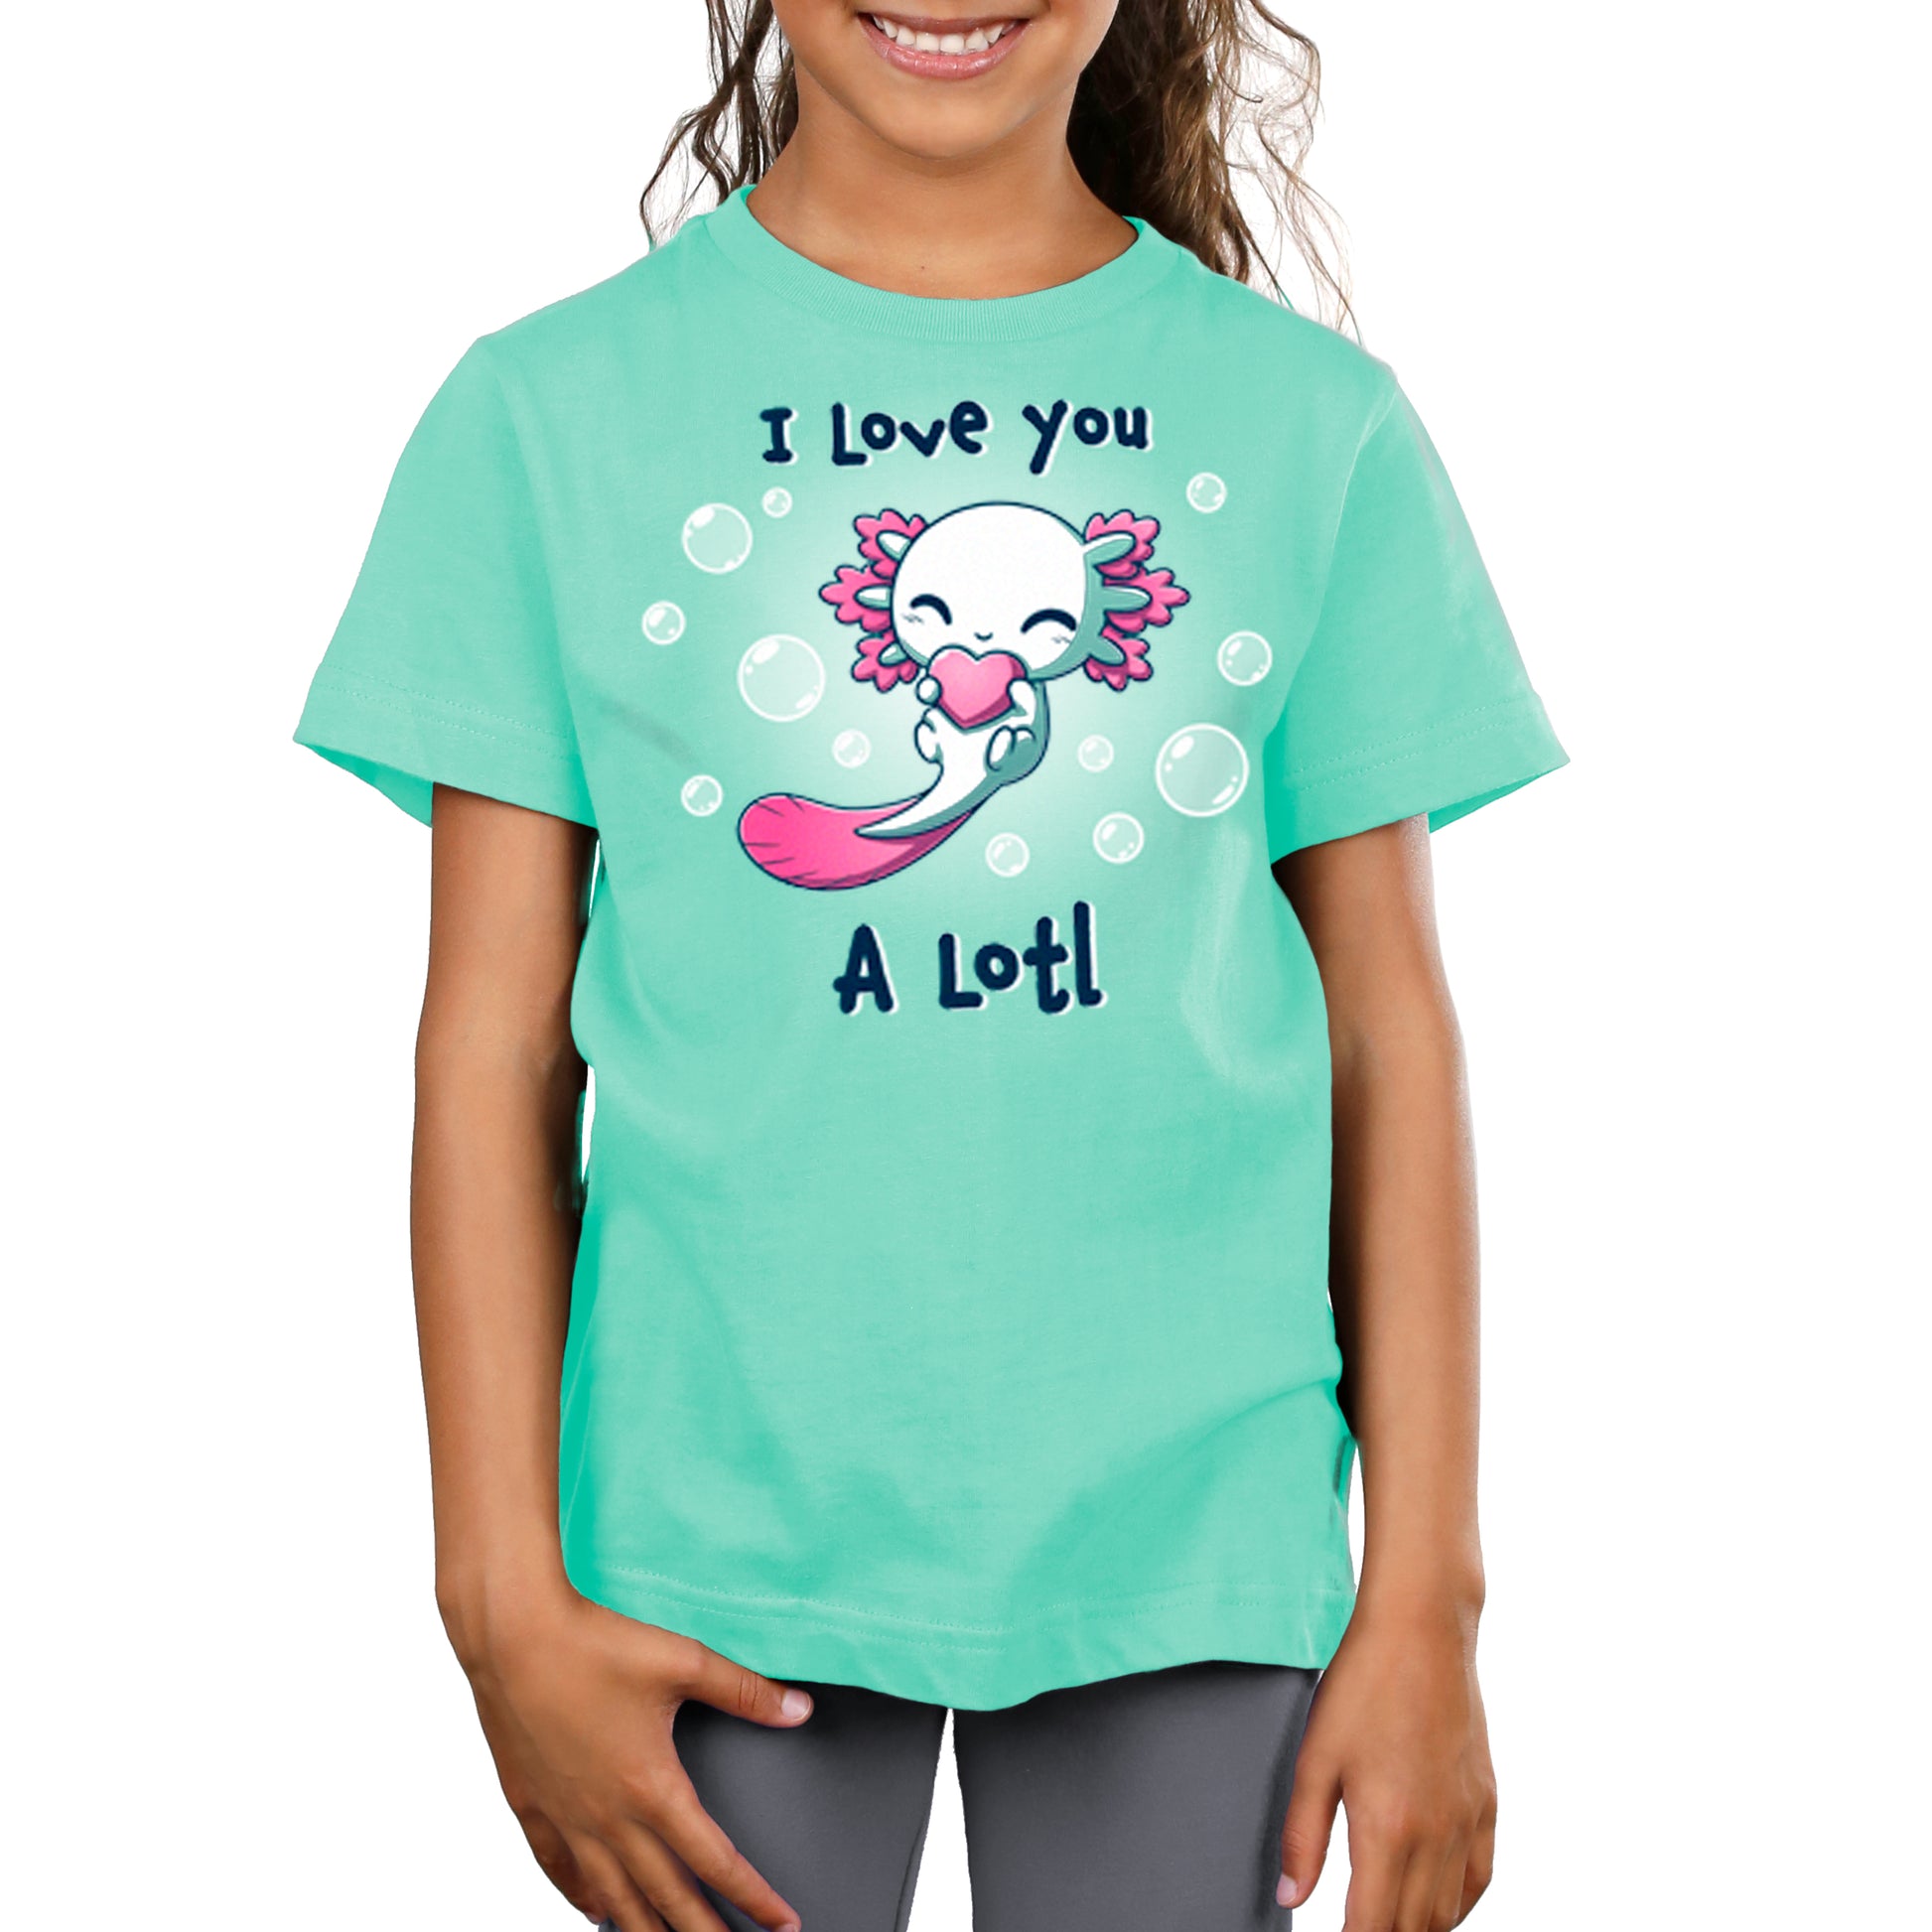 A girl wearing a Chill Blue t-shirt that says "I Love You A Lotl" from TeeTurtle.